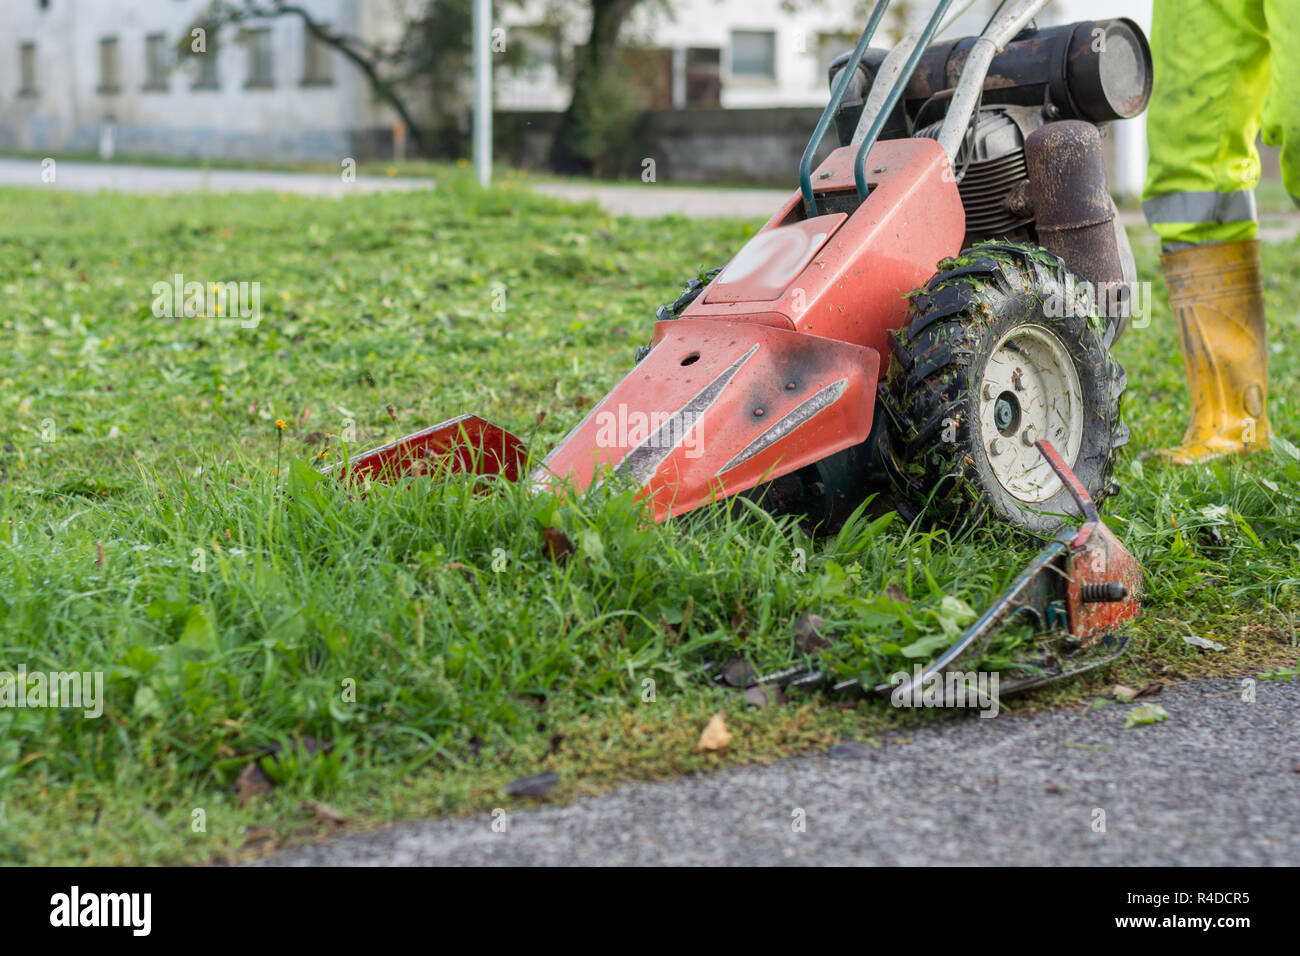 Landtechnik High Resolution Stock Photography and Images - Alamy